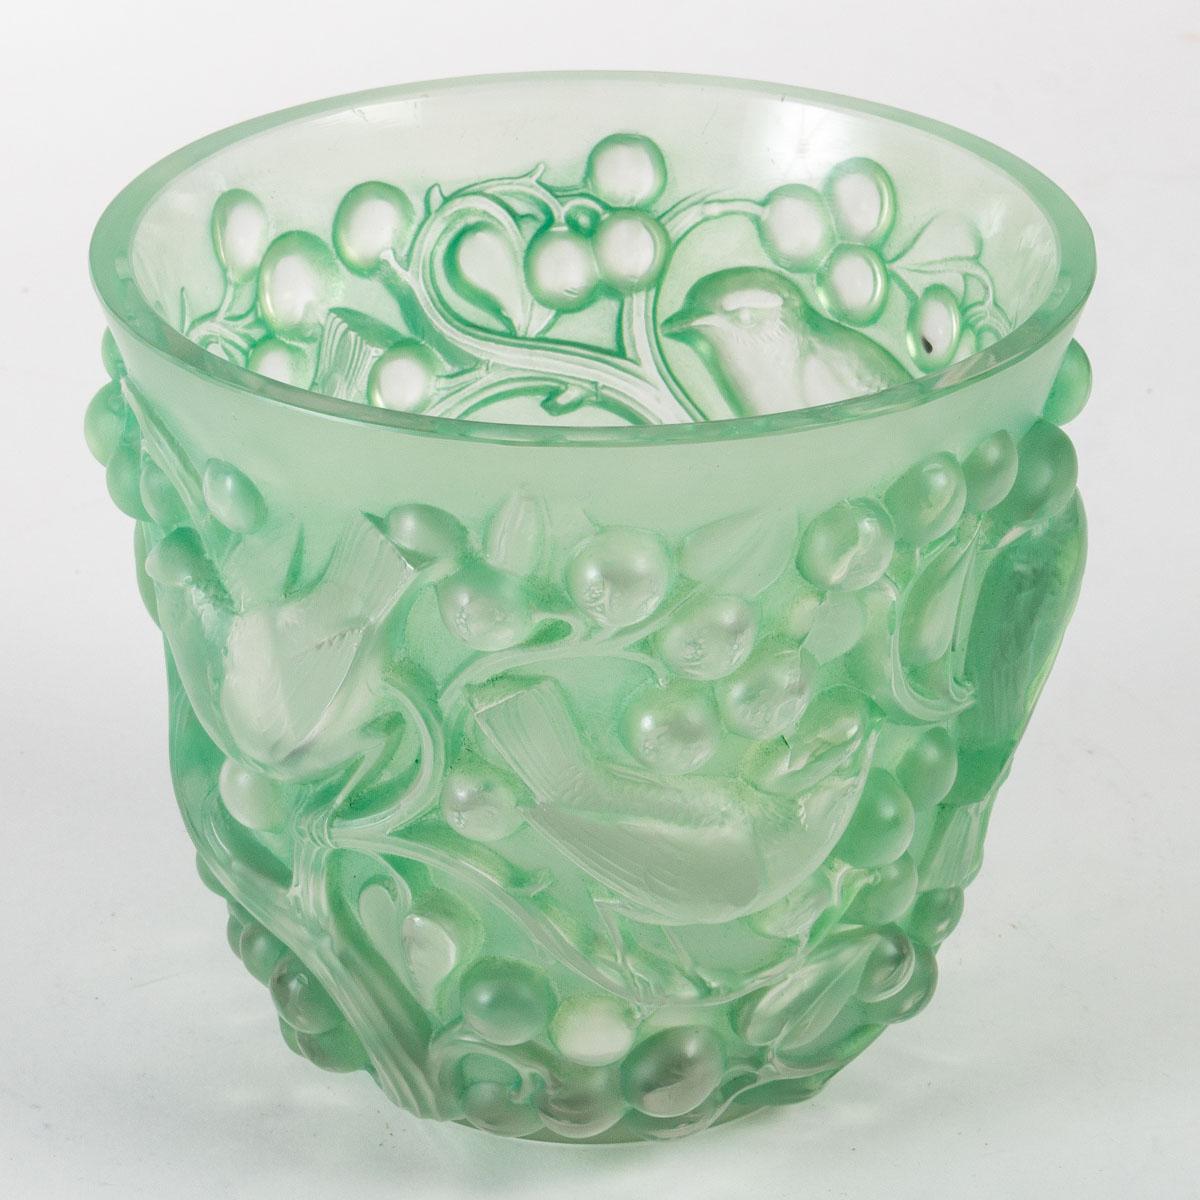 Art Deco 1927 René Lalique Avallon Vase in Frosted Glass with Green Patina Sparrows Birds